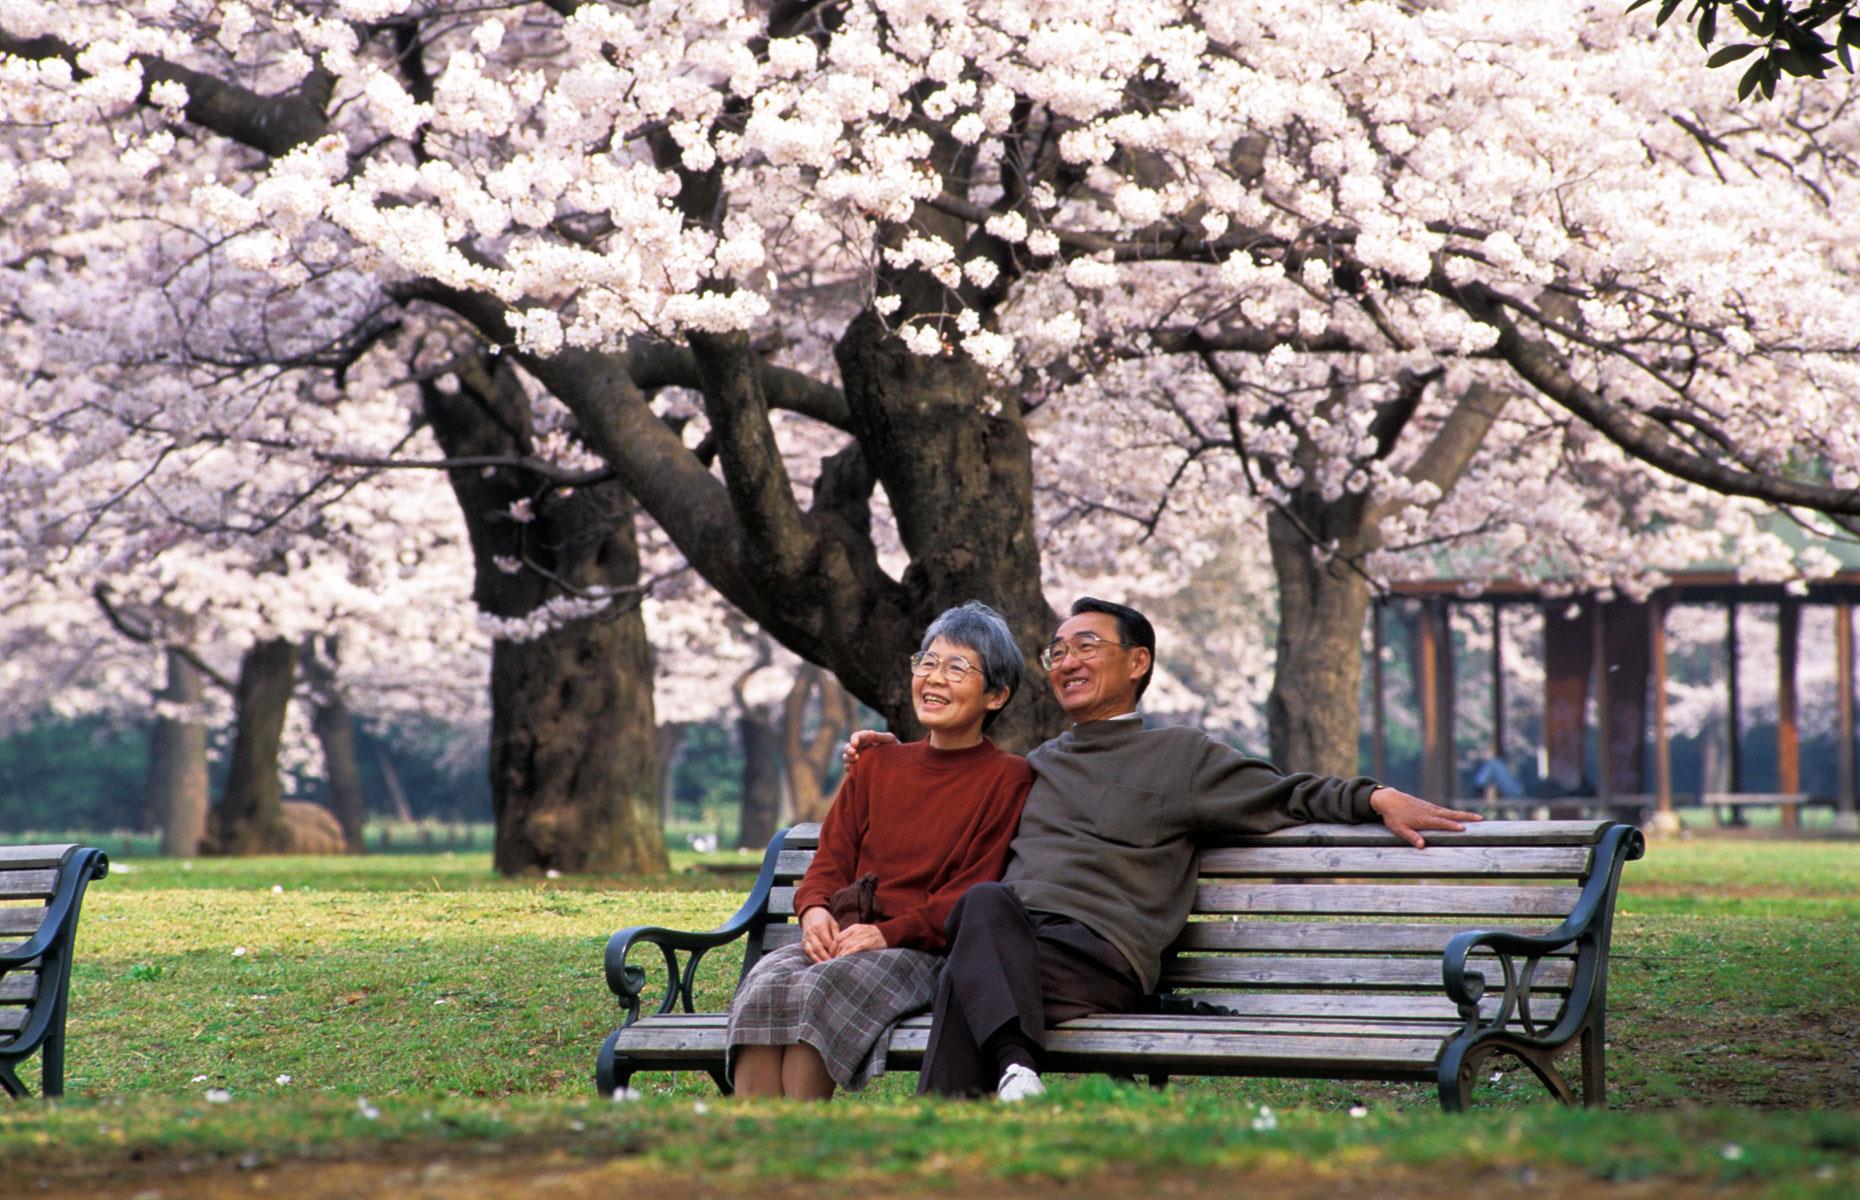 <p>Life expectancy in Japan is currently 85 years, up from 59.2 in 1950. The figure is set to reach 88.3 in 2050.</p>  <p>Japanese people tend to live long lives because rates of heart disease and cancer are relatively low. This is mainly due to the nation's extremely low obesity rate and traditional diet, which eschews red meat for fish and is rich in plant-based foods. Unsurprisingly, Japan has the highest number of centenarians per capita and Okinawa, one of the original five Blue Zones, is located in the country.</p>